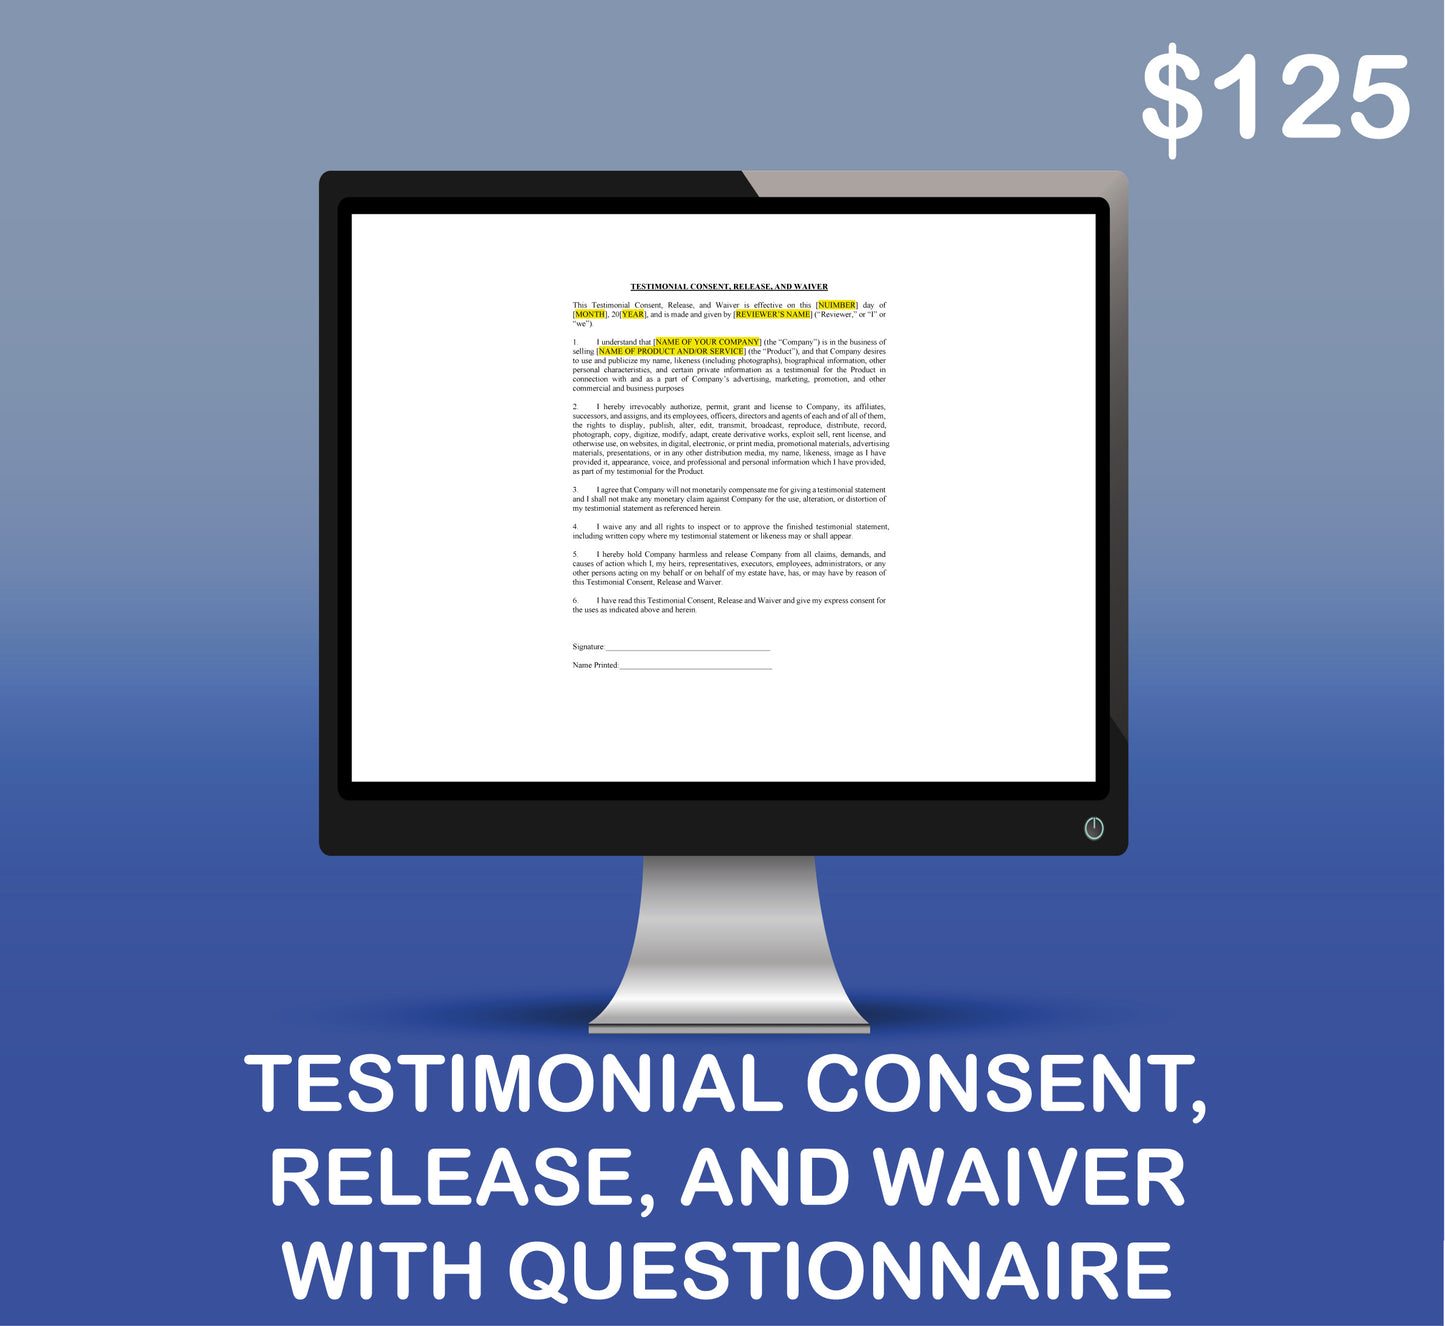 Testimonial Consent, Release, and Waiver with Questionnaire